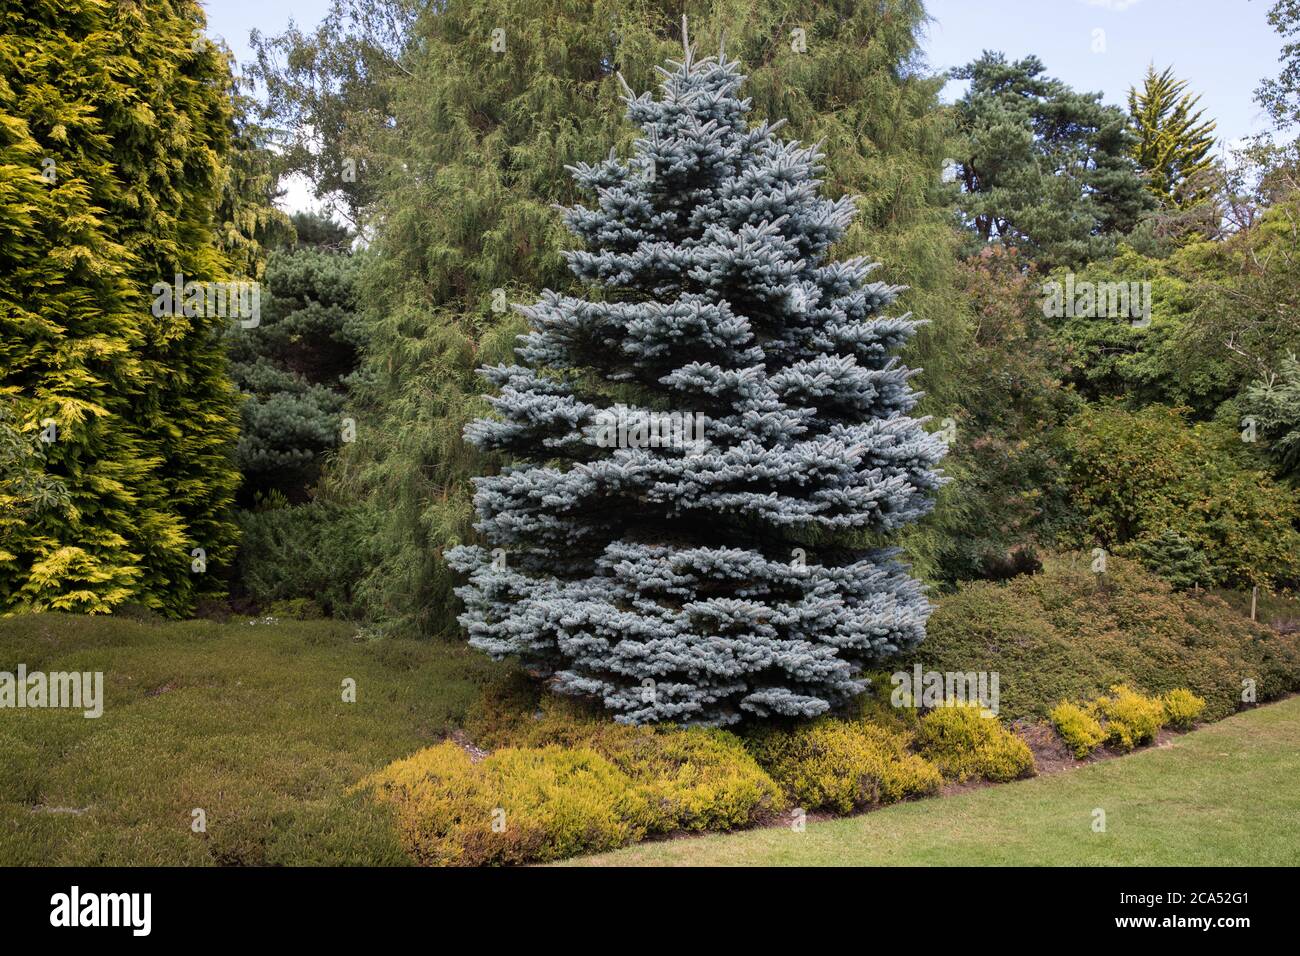 Egham, UK. 3rd August, 2020. A blue spruce (Picea pungens) is pictured in Windsor Great Park. The blue spruce is an evergreen ornamental conifer with Stock Photo